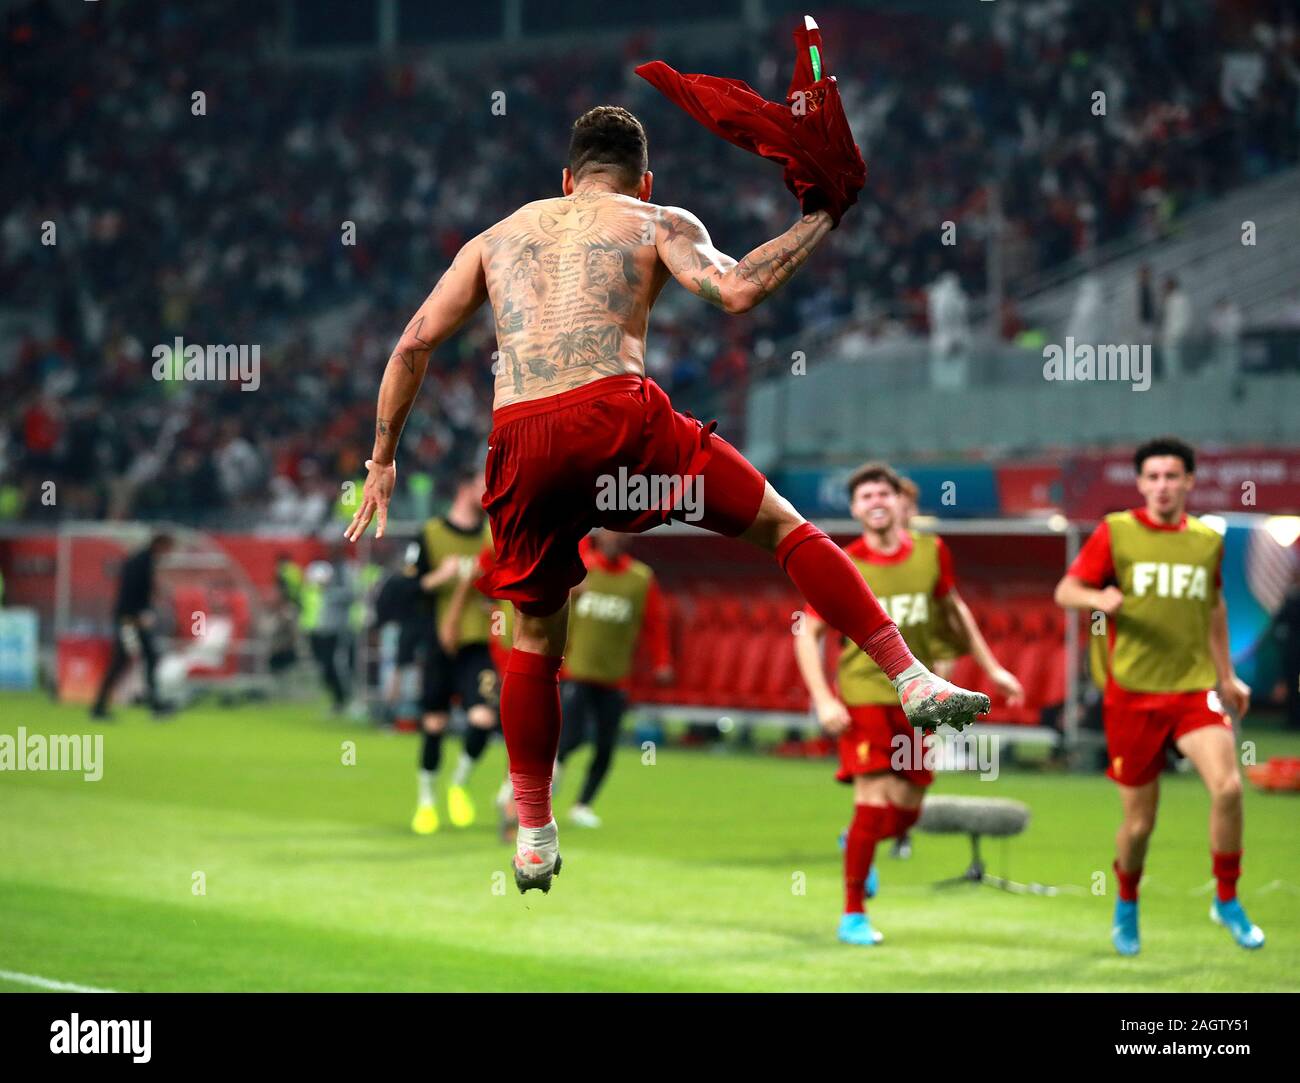 Liverpool's Roberto Firmino celebrates scoring his side's first goal of the game during the FIFA Club World Cup final at the Khalifa International Stadium, Doha. Stock Photo